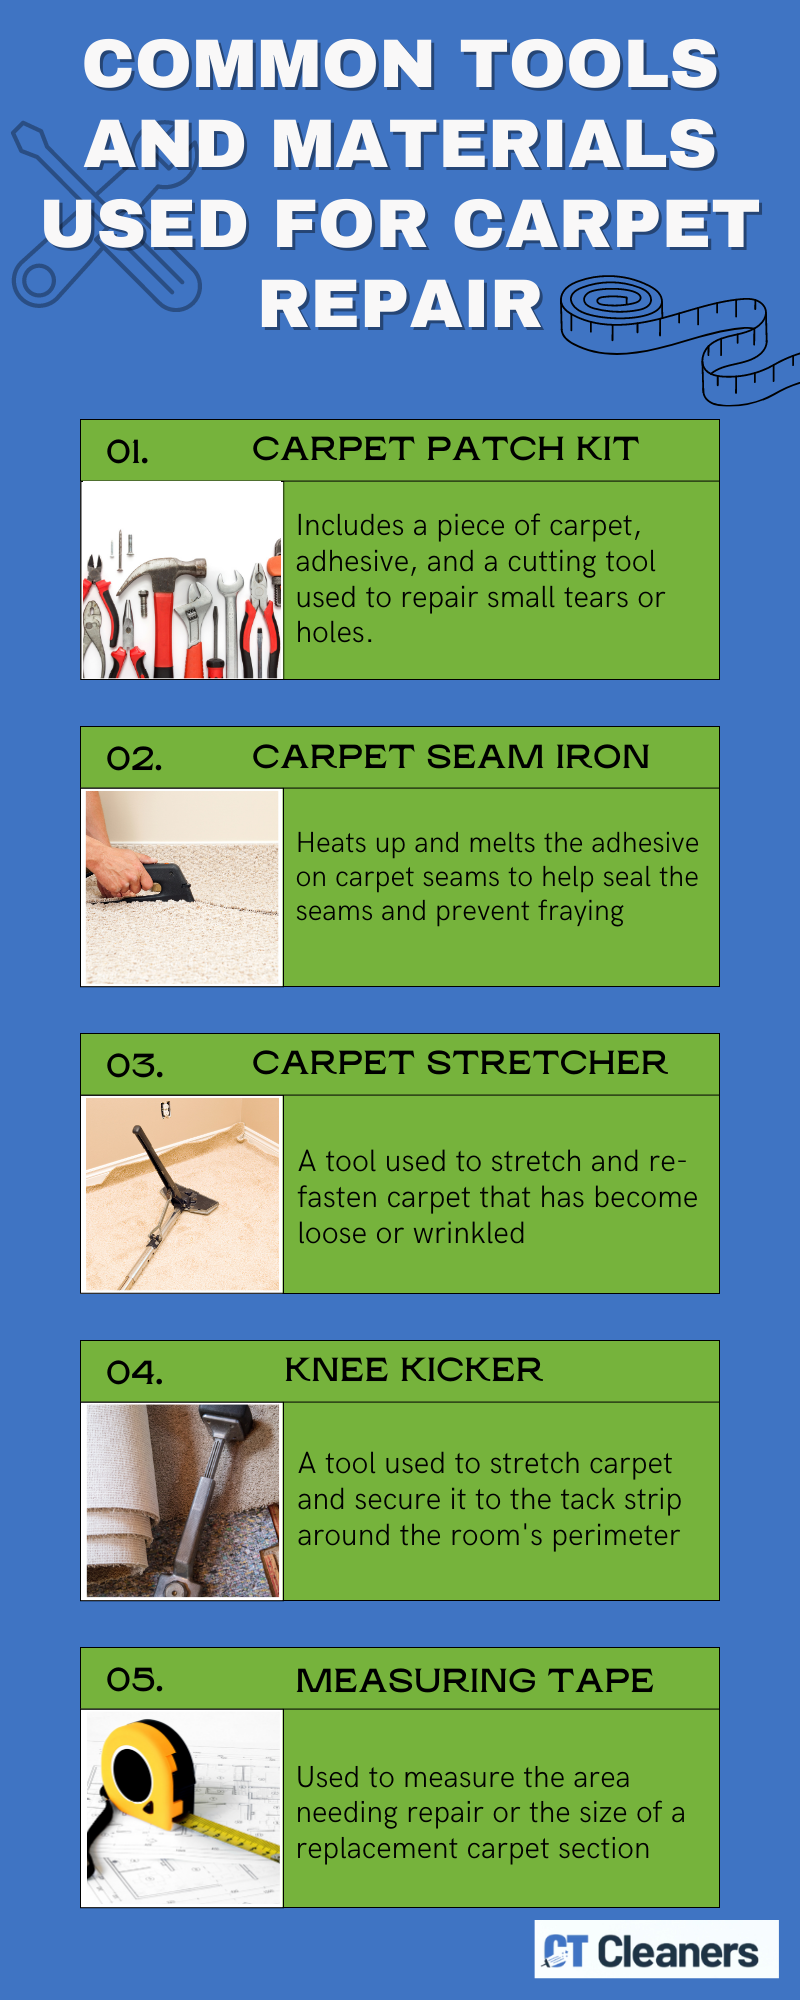 Common Tools and Materials Used for Carpet Repair